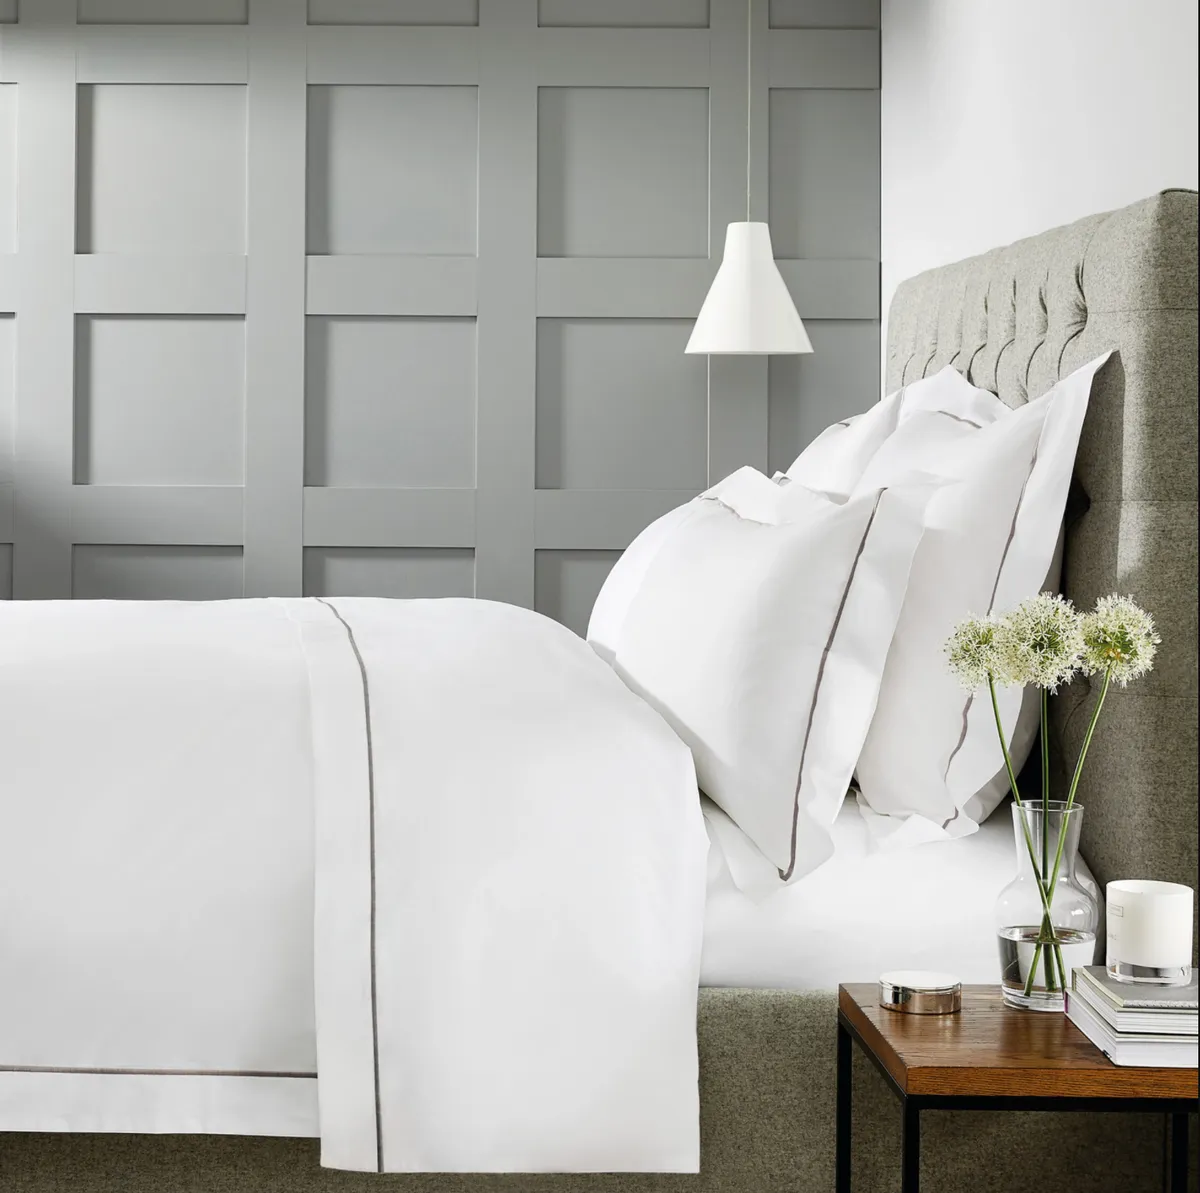 Savoy Bed Linen Collection, from £25, The White Company